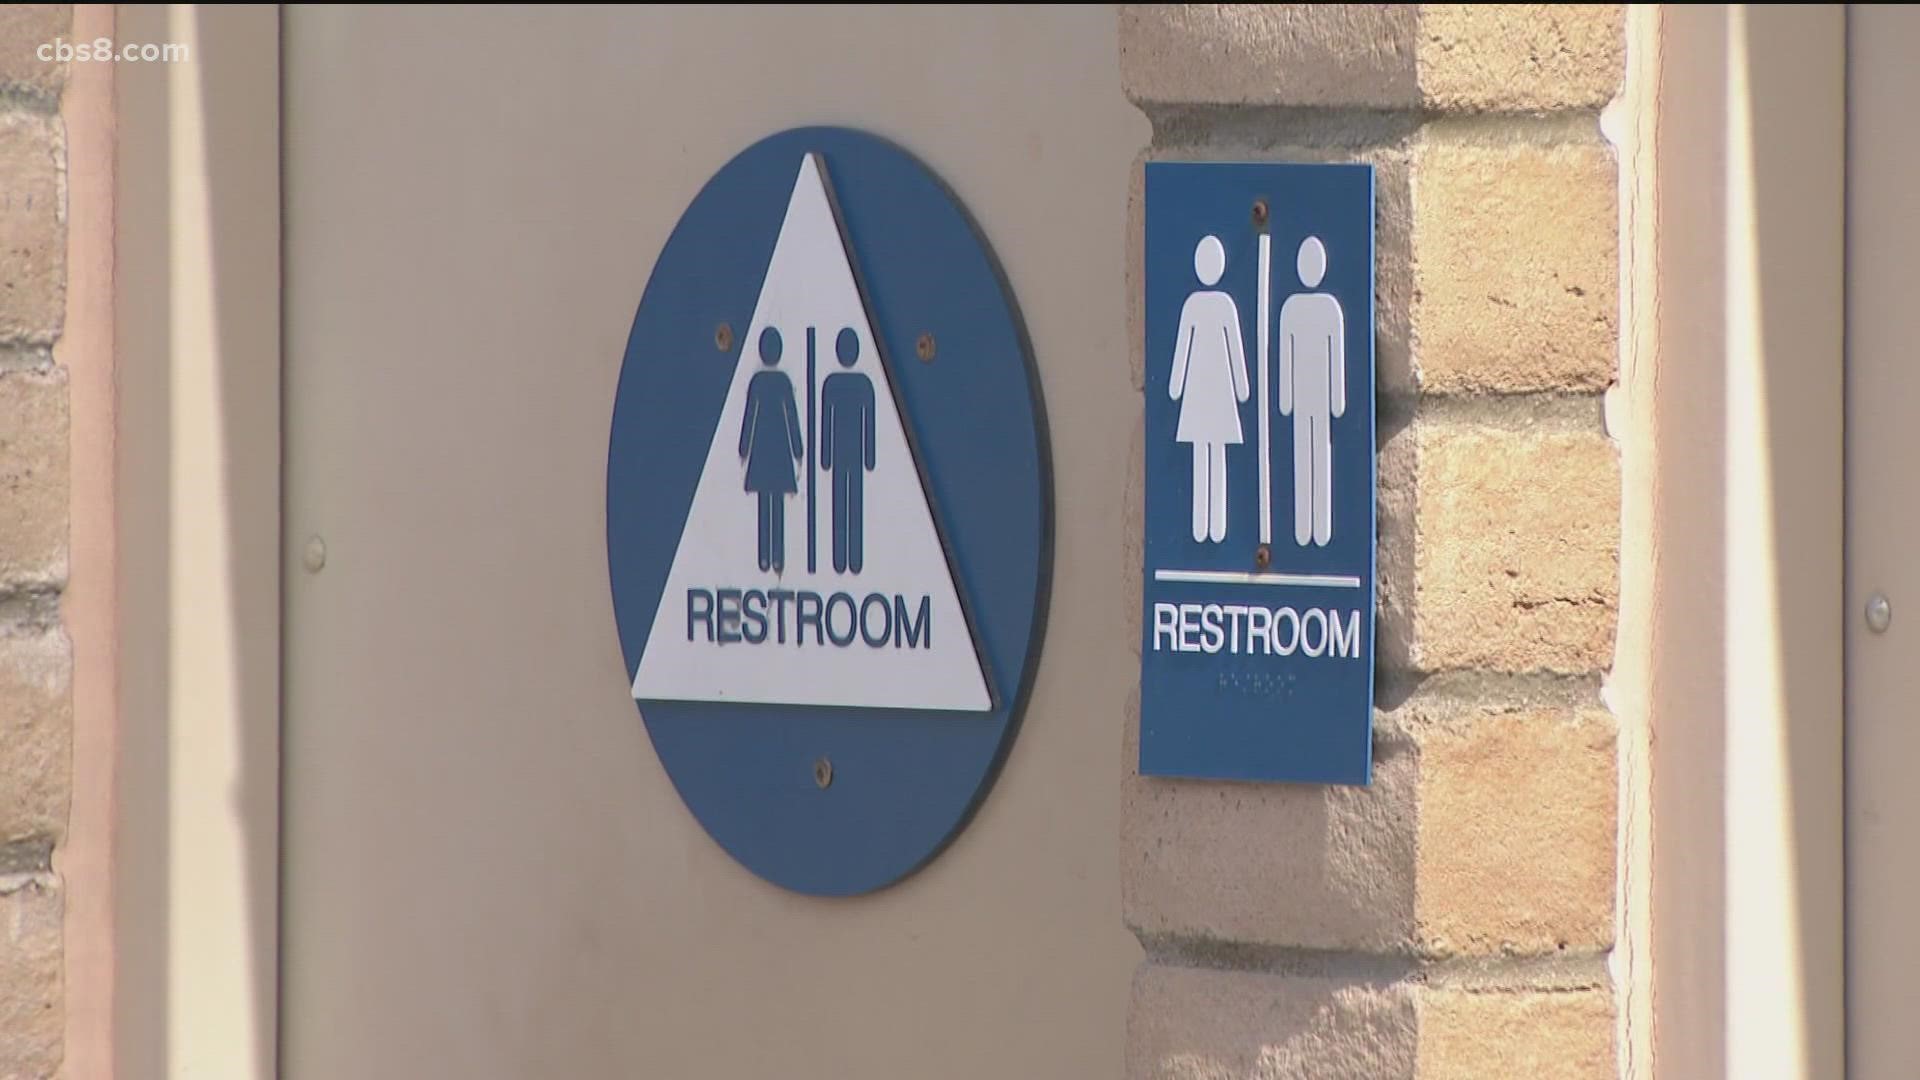 According to the City, the bathrooms are only cleaned once a day right now, due to staffing shortages.